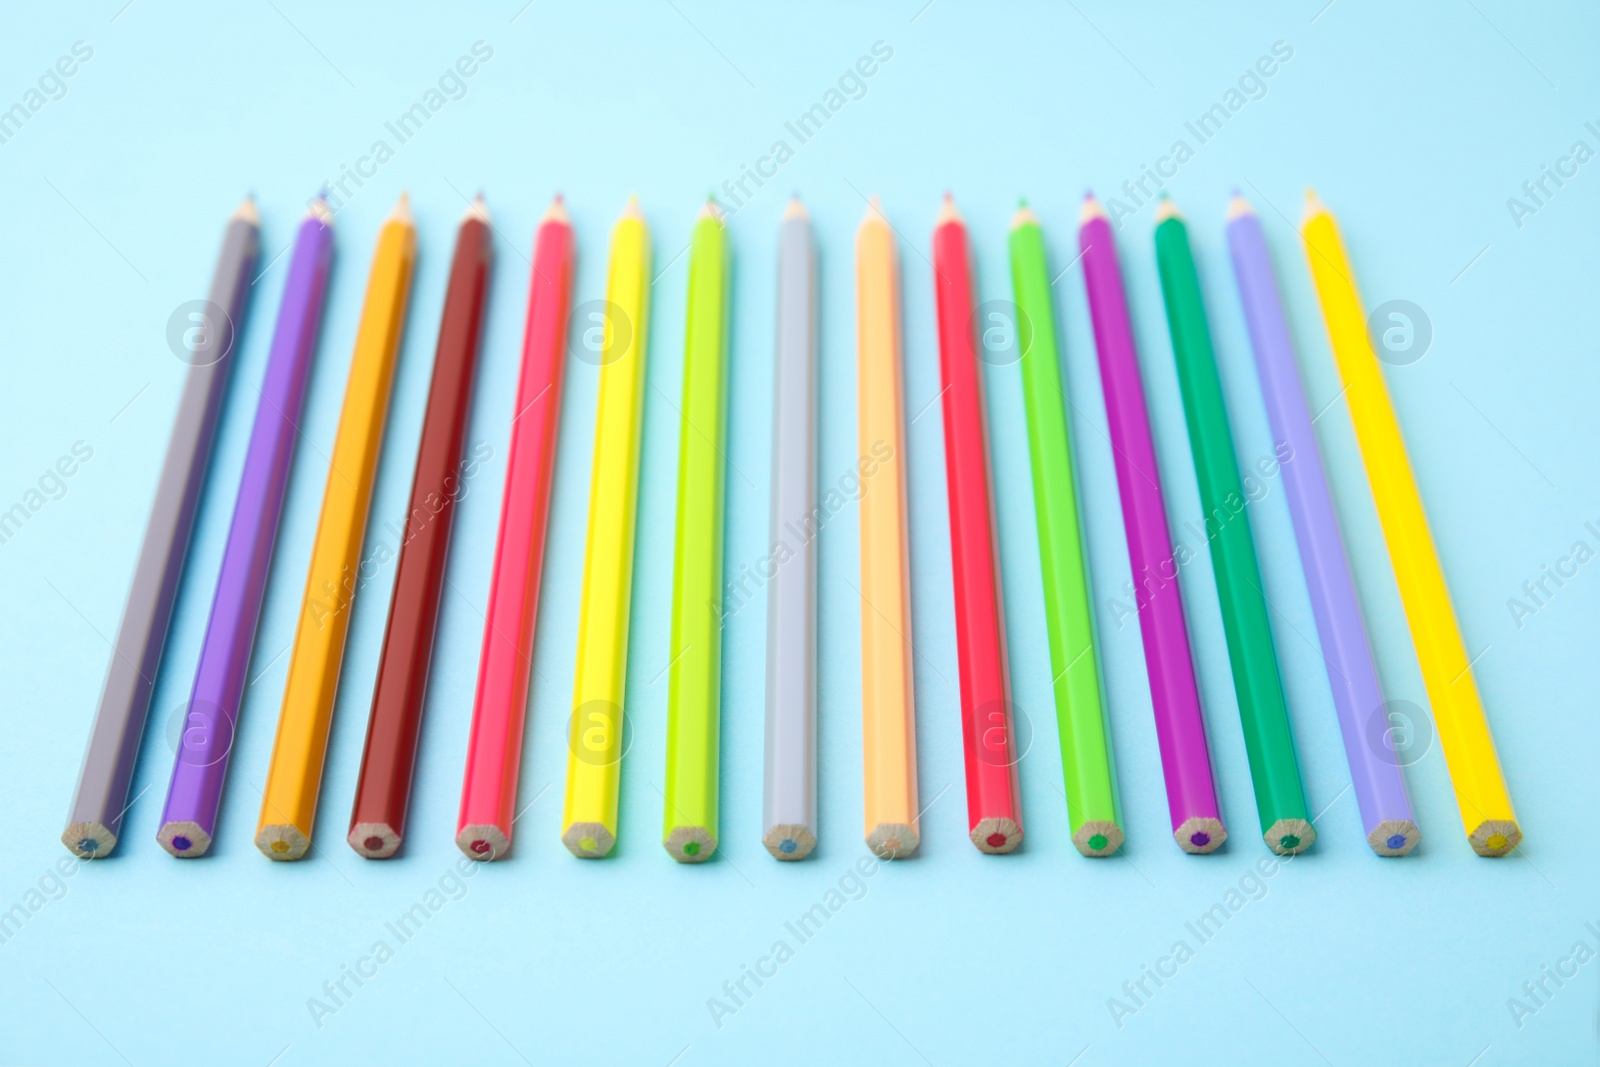 Photo of Colorful wooden pencils on light blue background